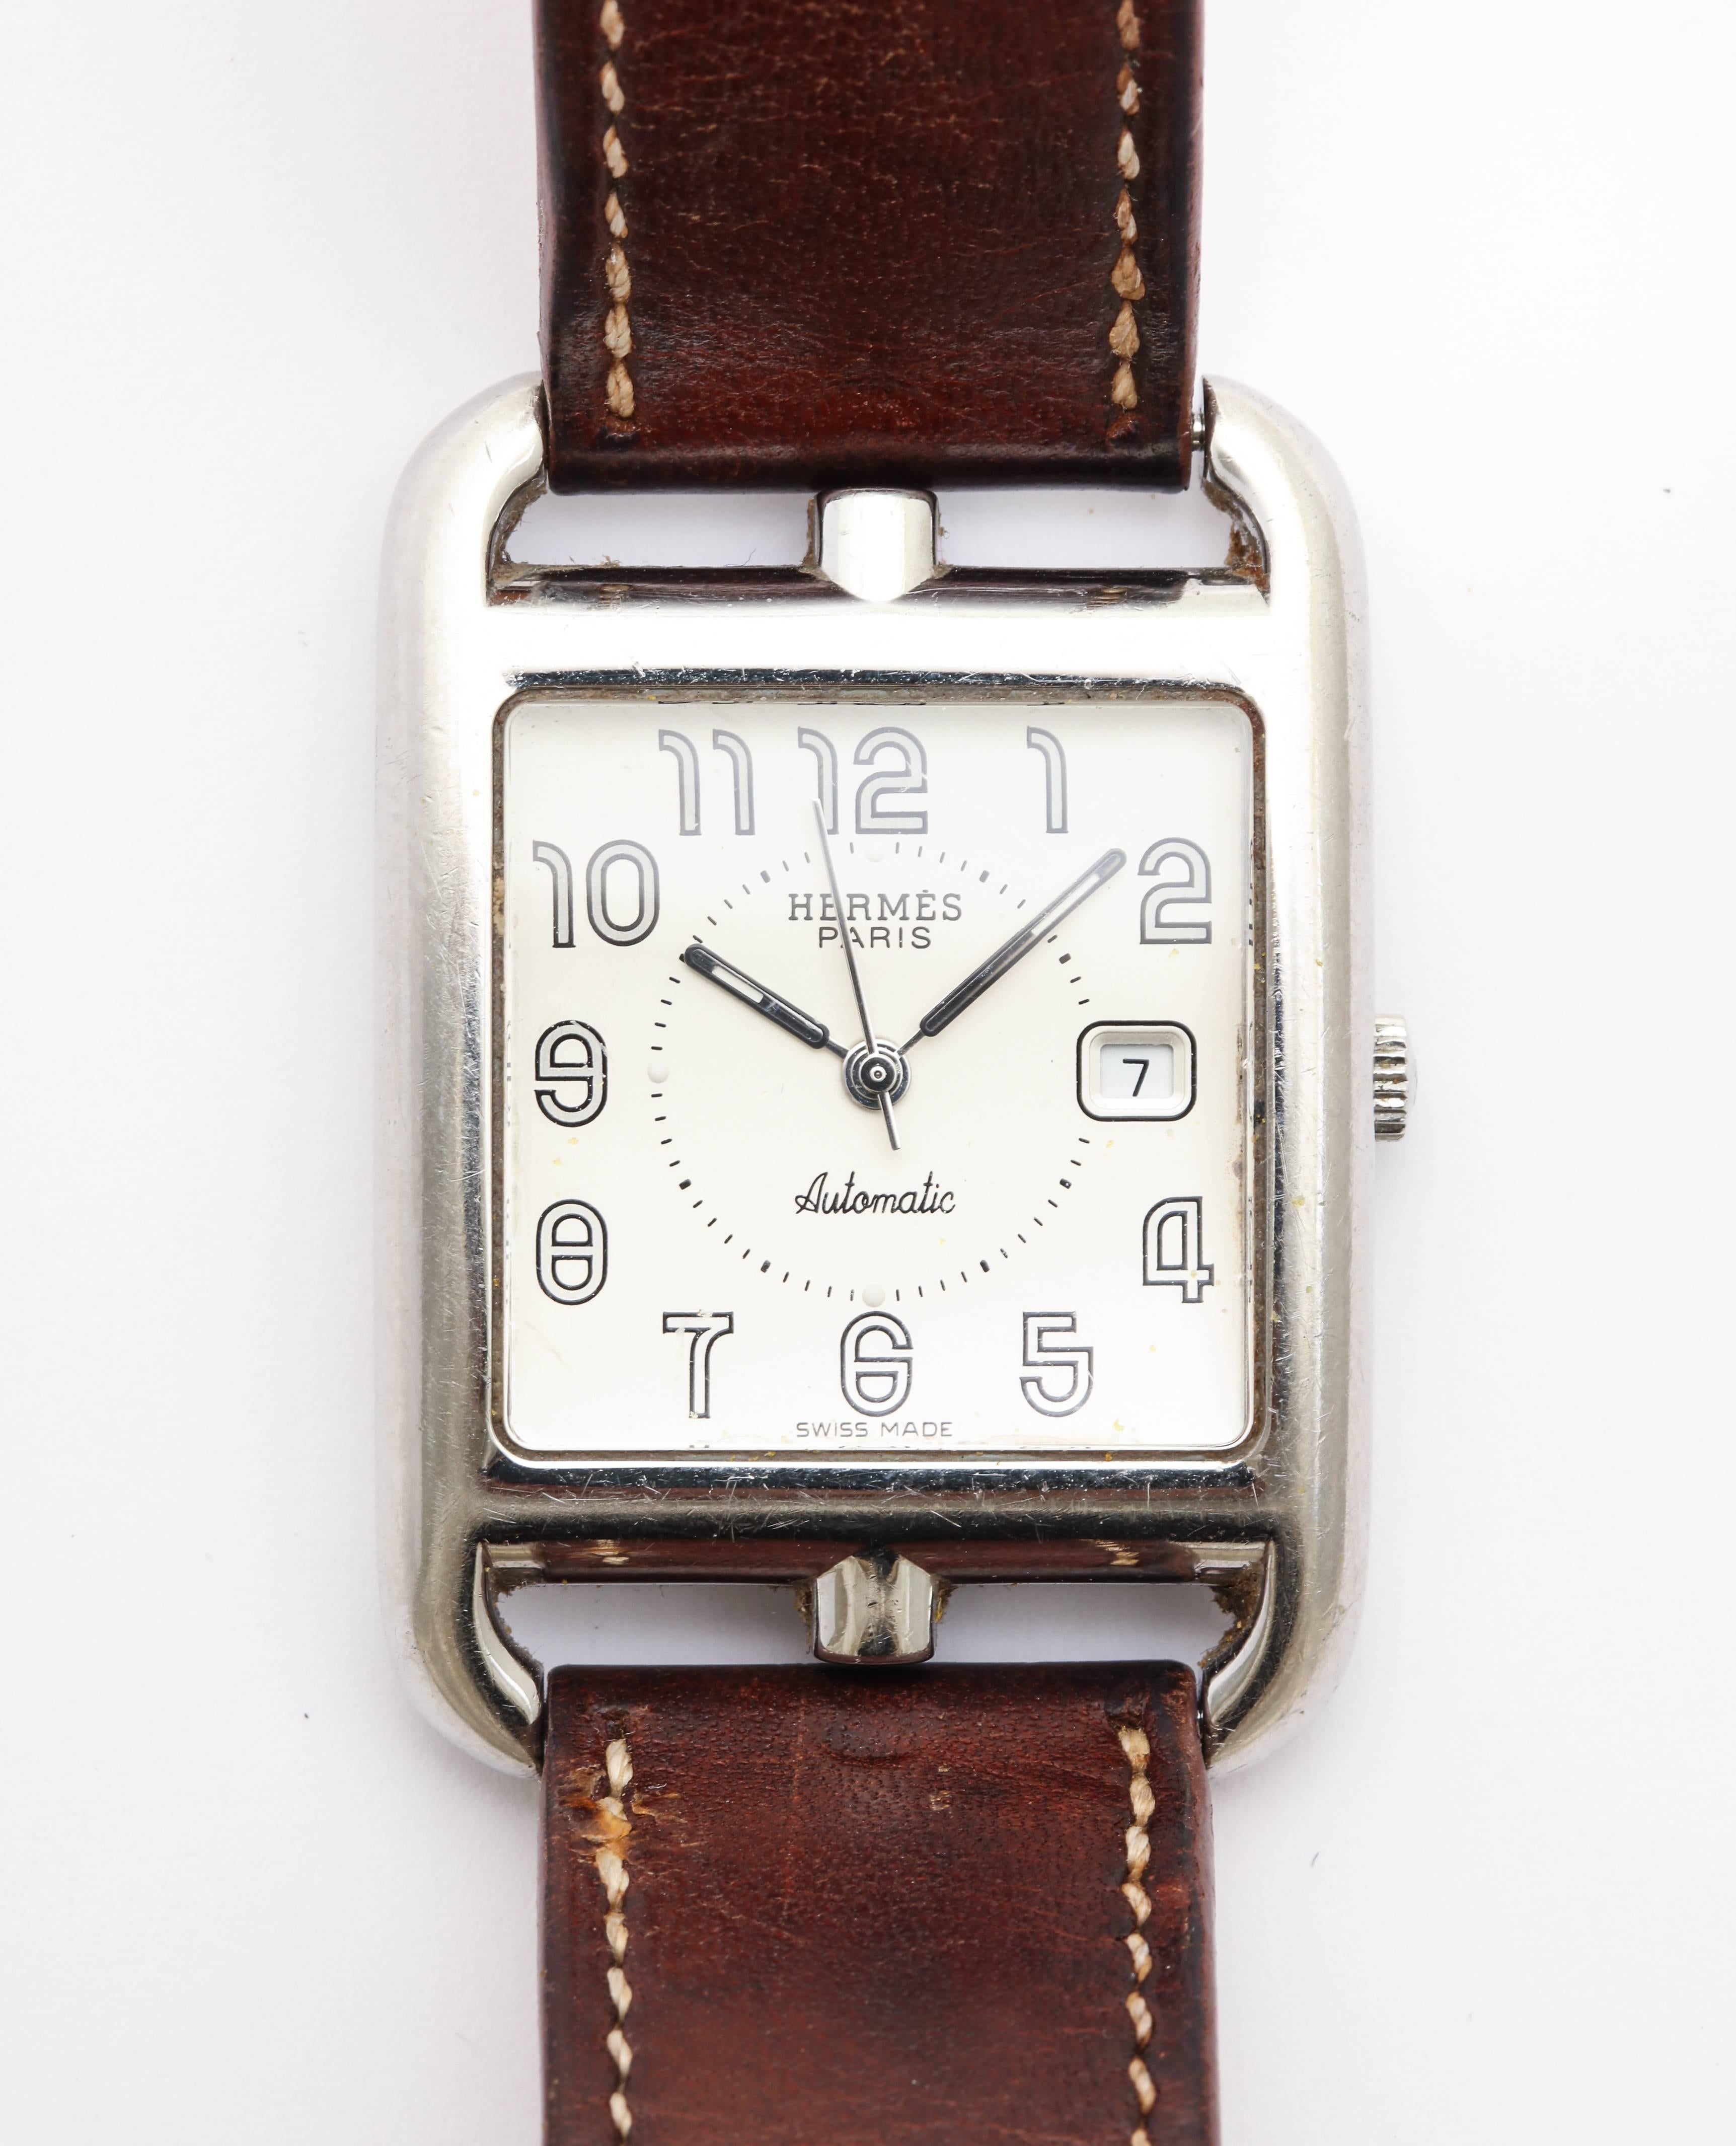 A great classic double strap 'cape cod' Hermes watch from the 1990s.
The automatic movement is  the highest quality of Hermes movements and more
desirable to own.